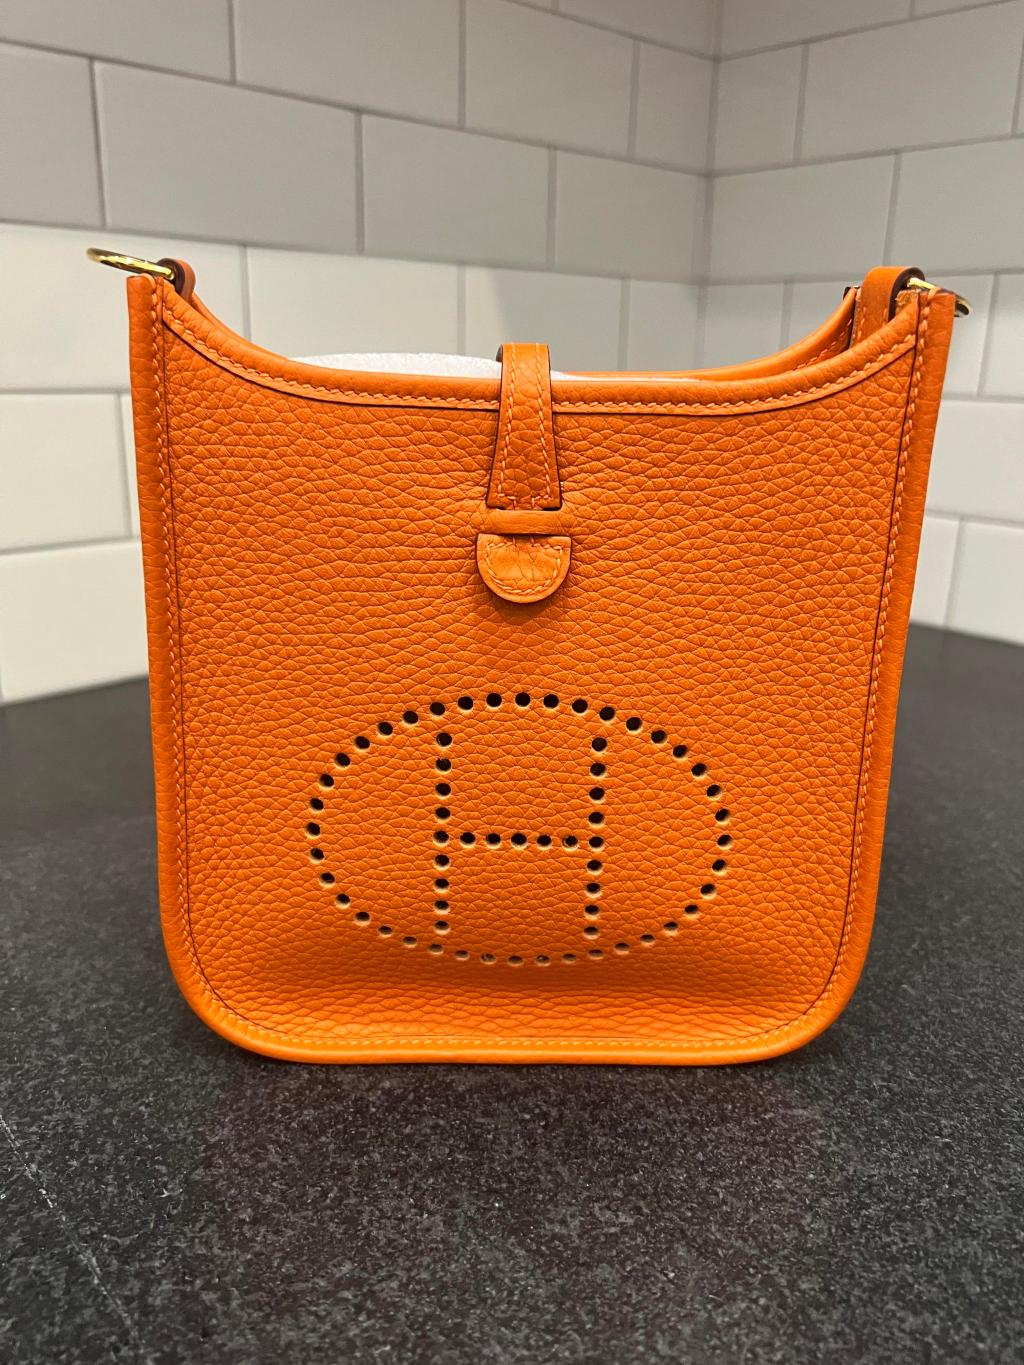 [Review] Orange Crush On My Evelyne Tpm In Orange From H Factory